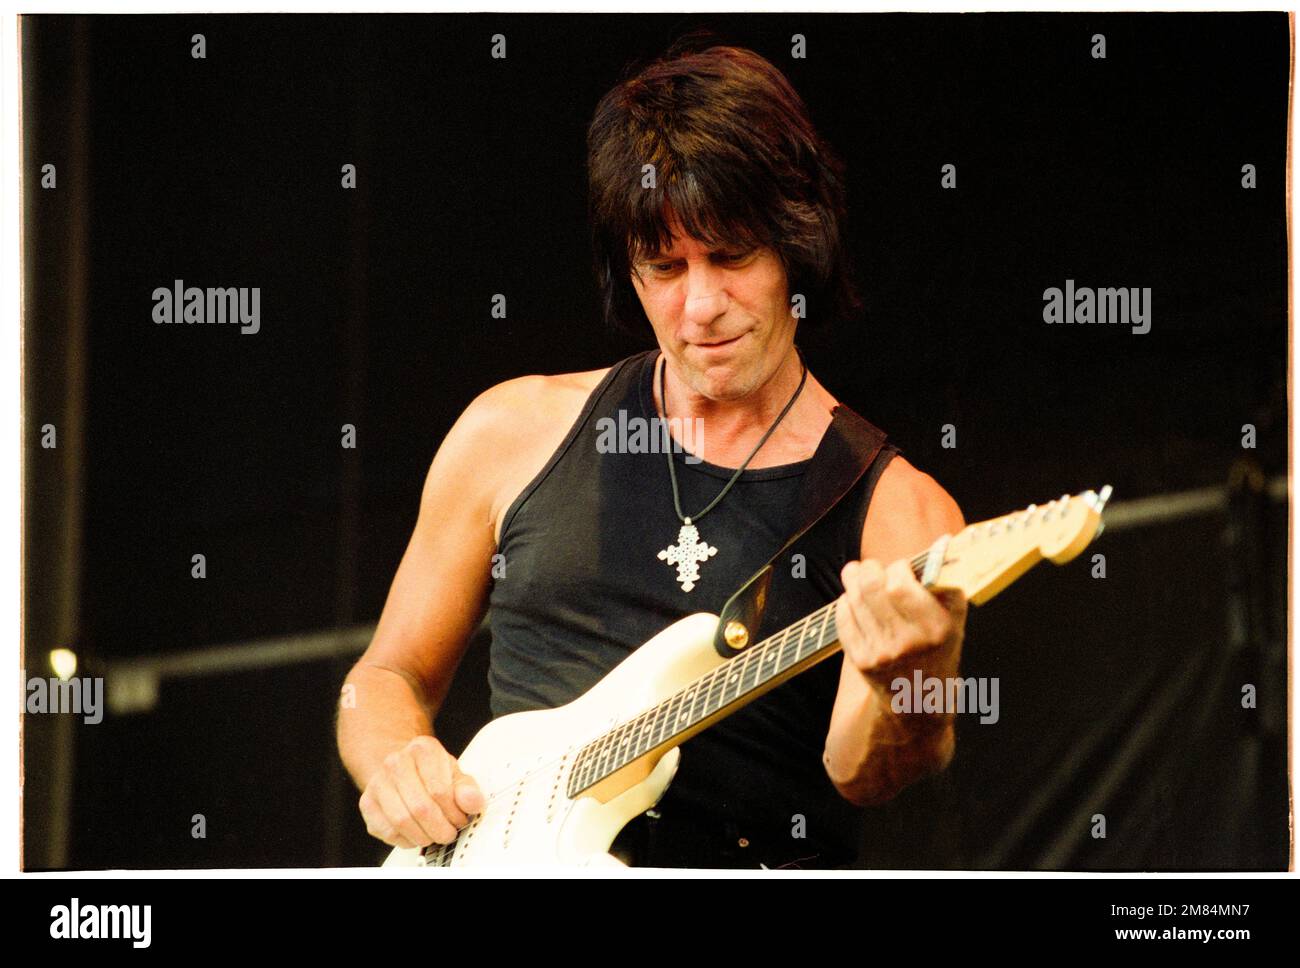 Guitar legend JEFF BECK supporting Sting playing at Cardiff Castle in Wales, UK, 27 July 2001. Photograph: Rob Watkins Stock Photo